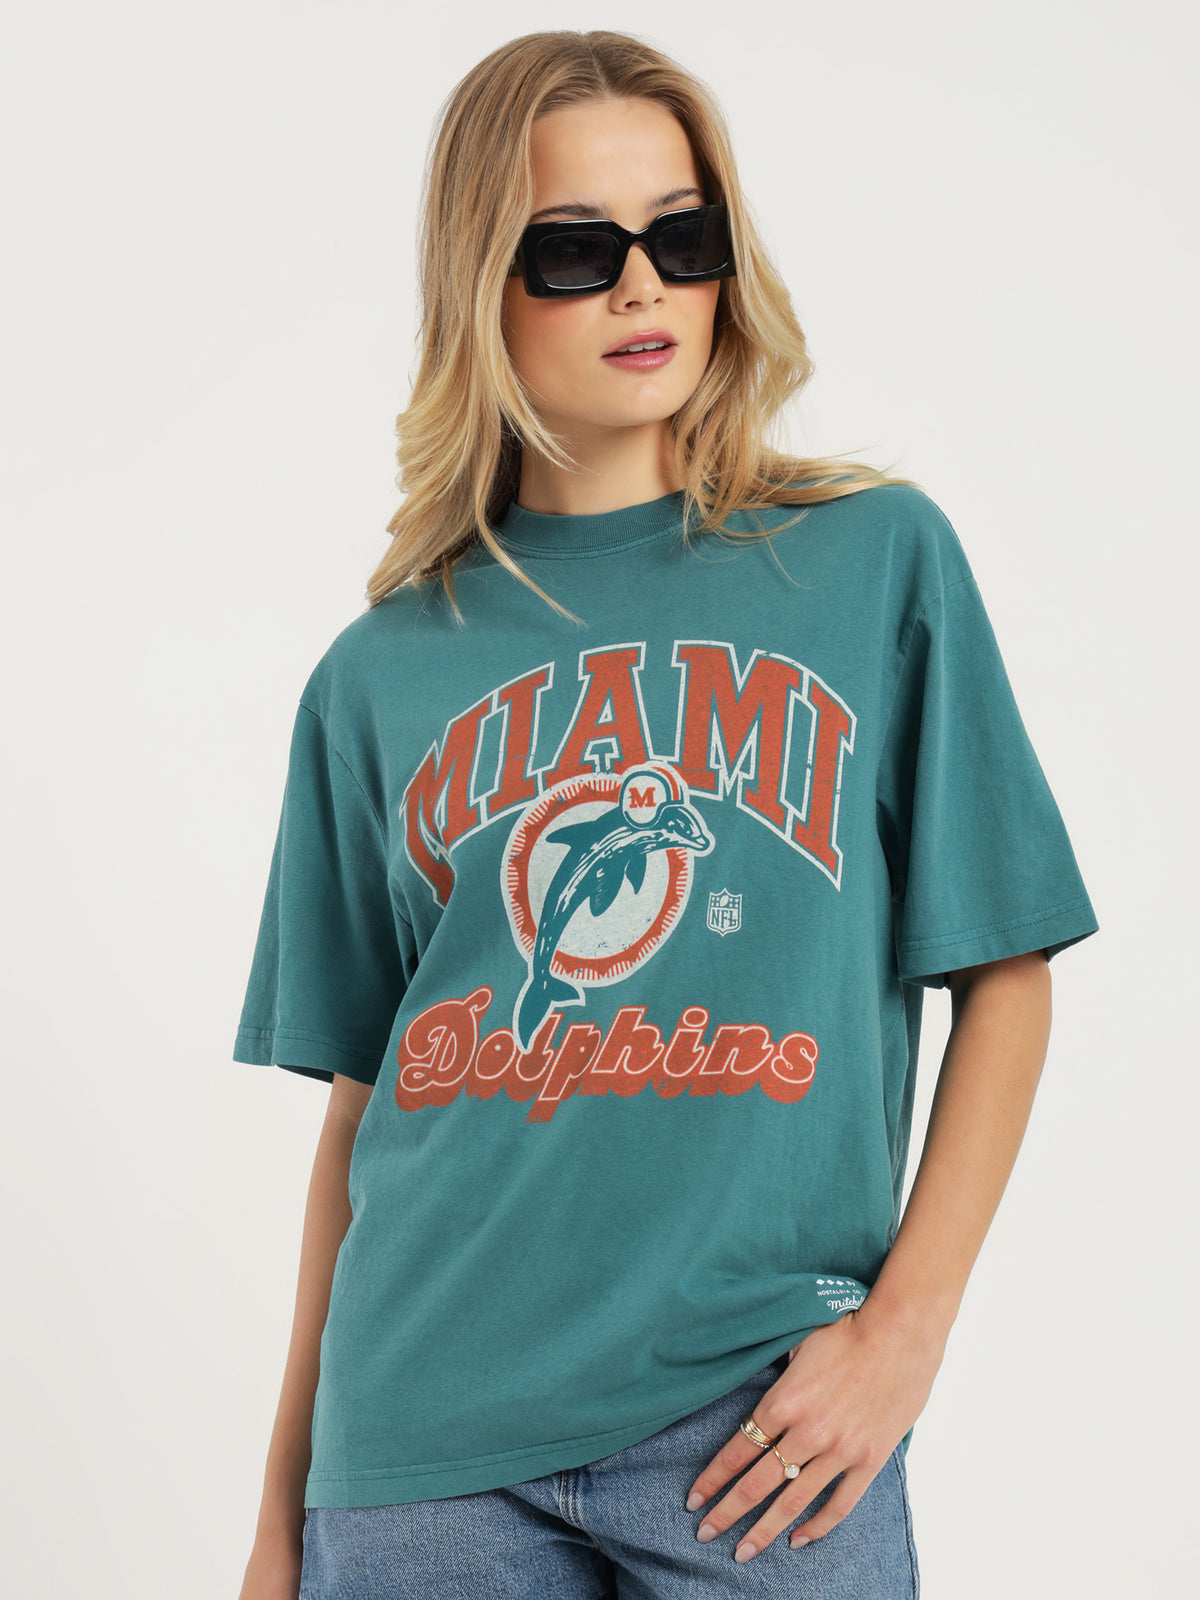 Team Up Dolphins T-Shirt in Teal